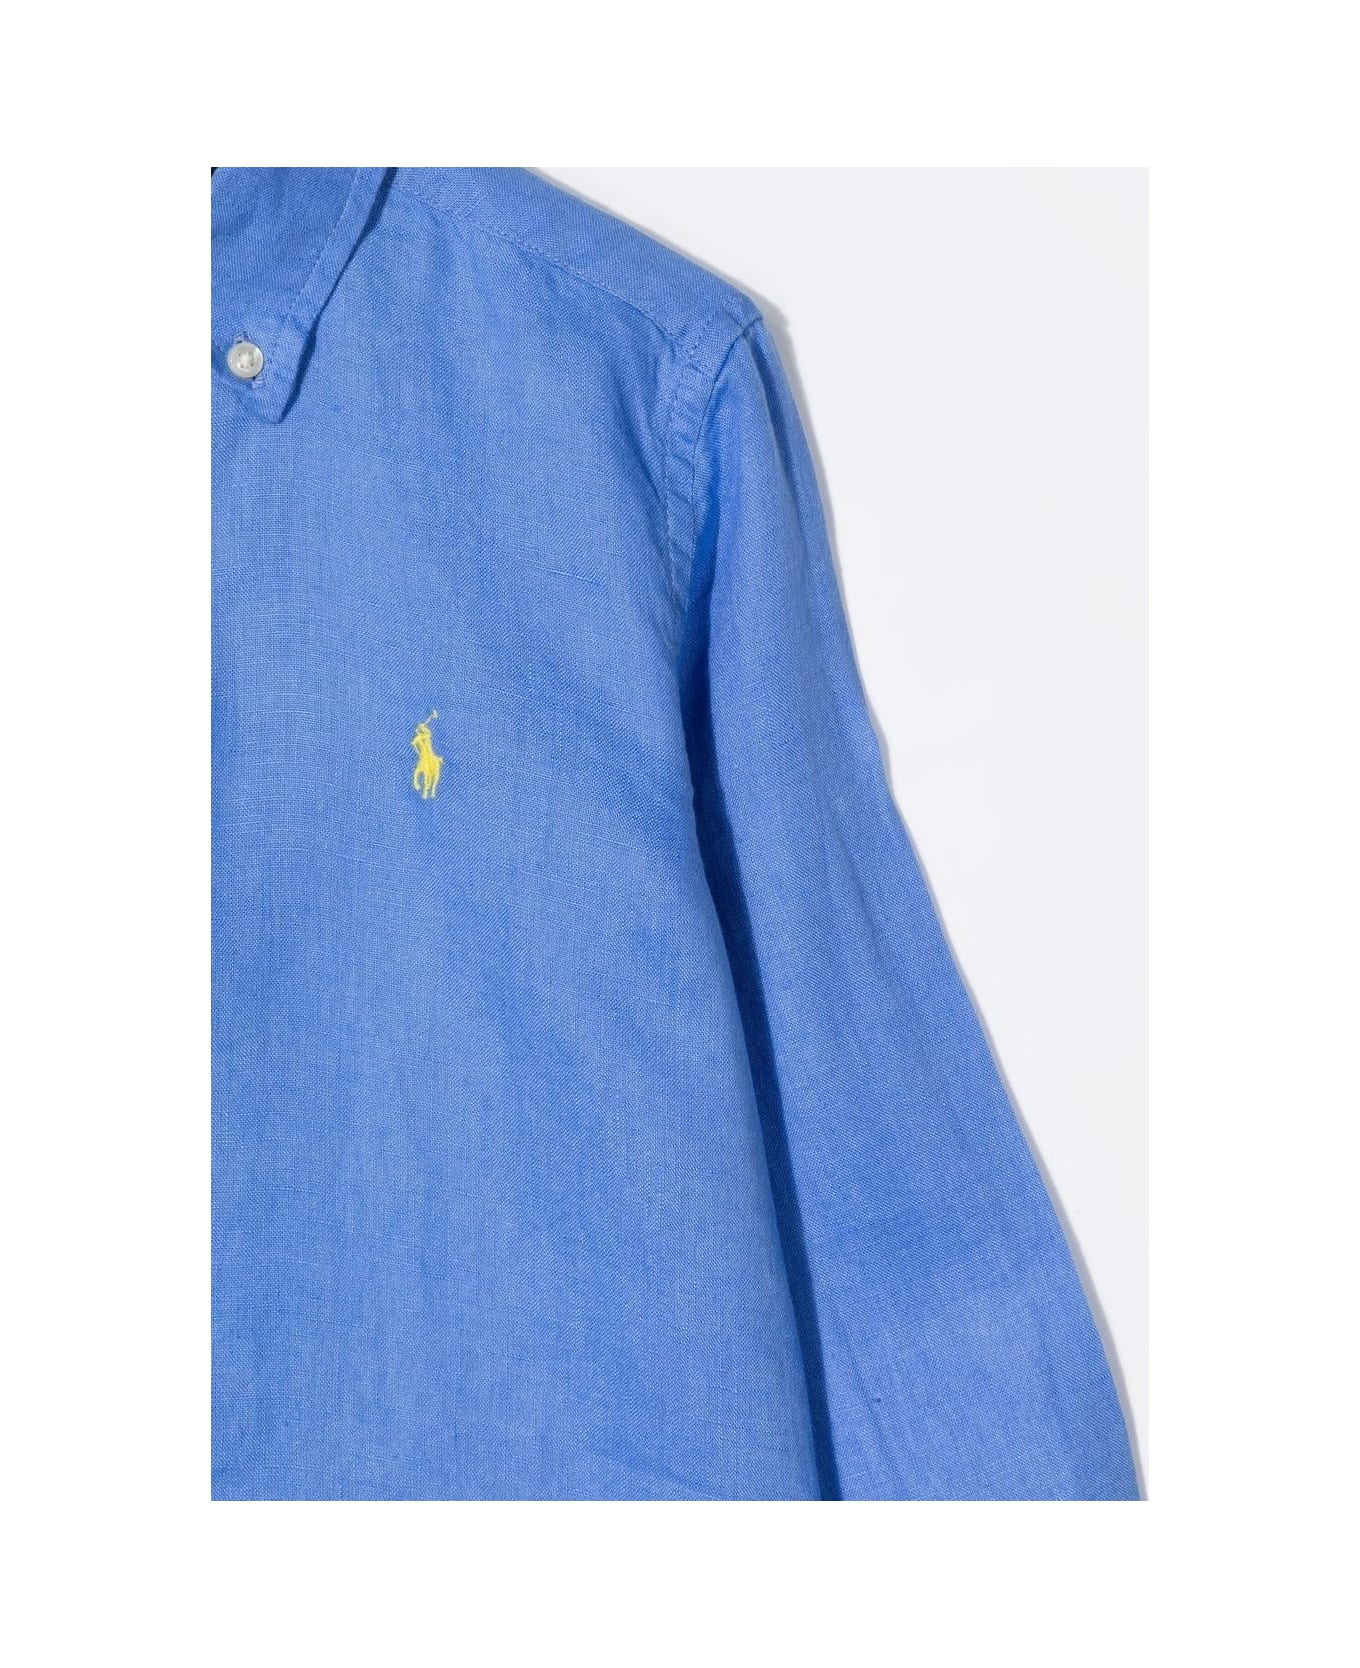 Ralph Lauren Blue Linen Shirt With Embroidered Pony - Blue シャツ